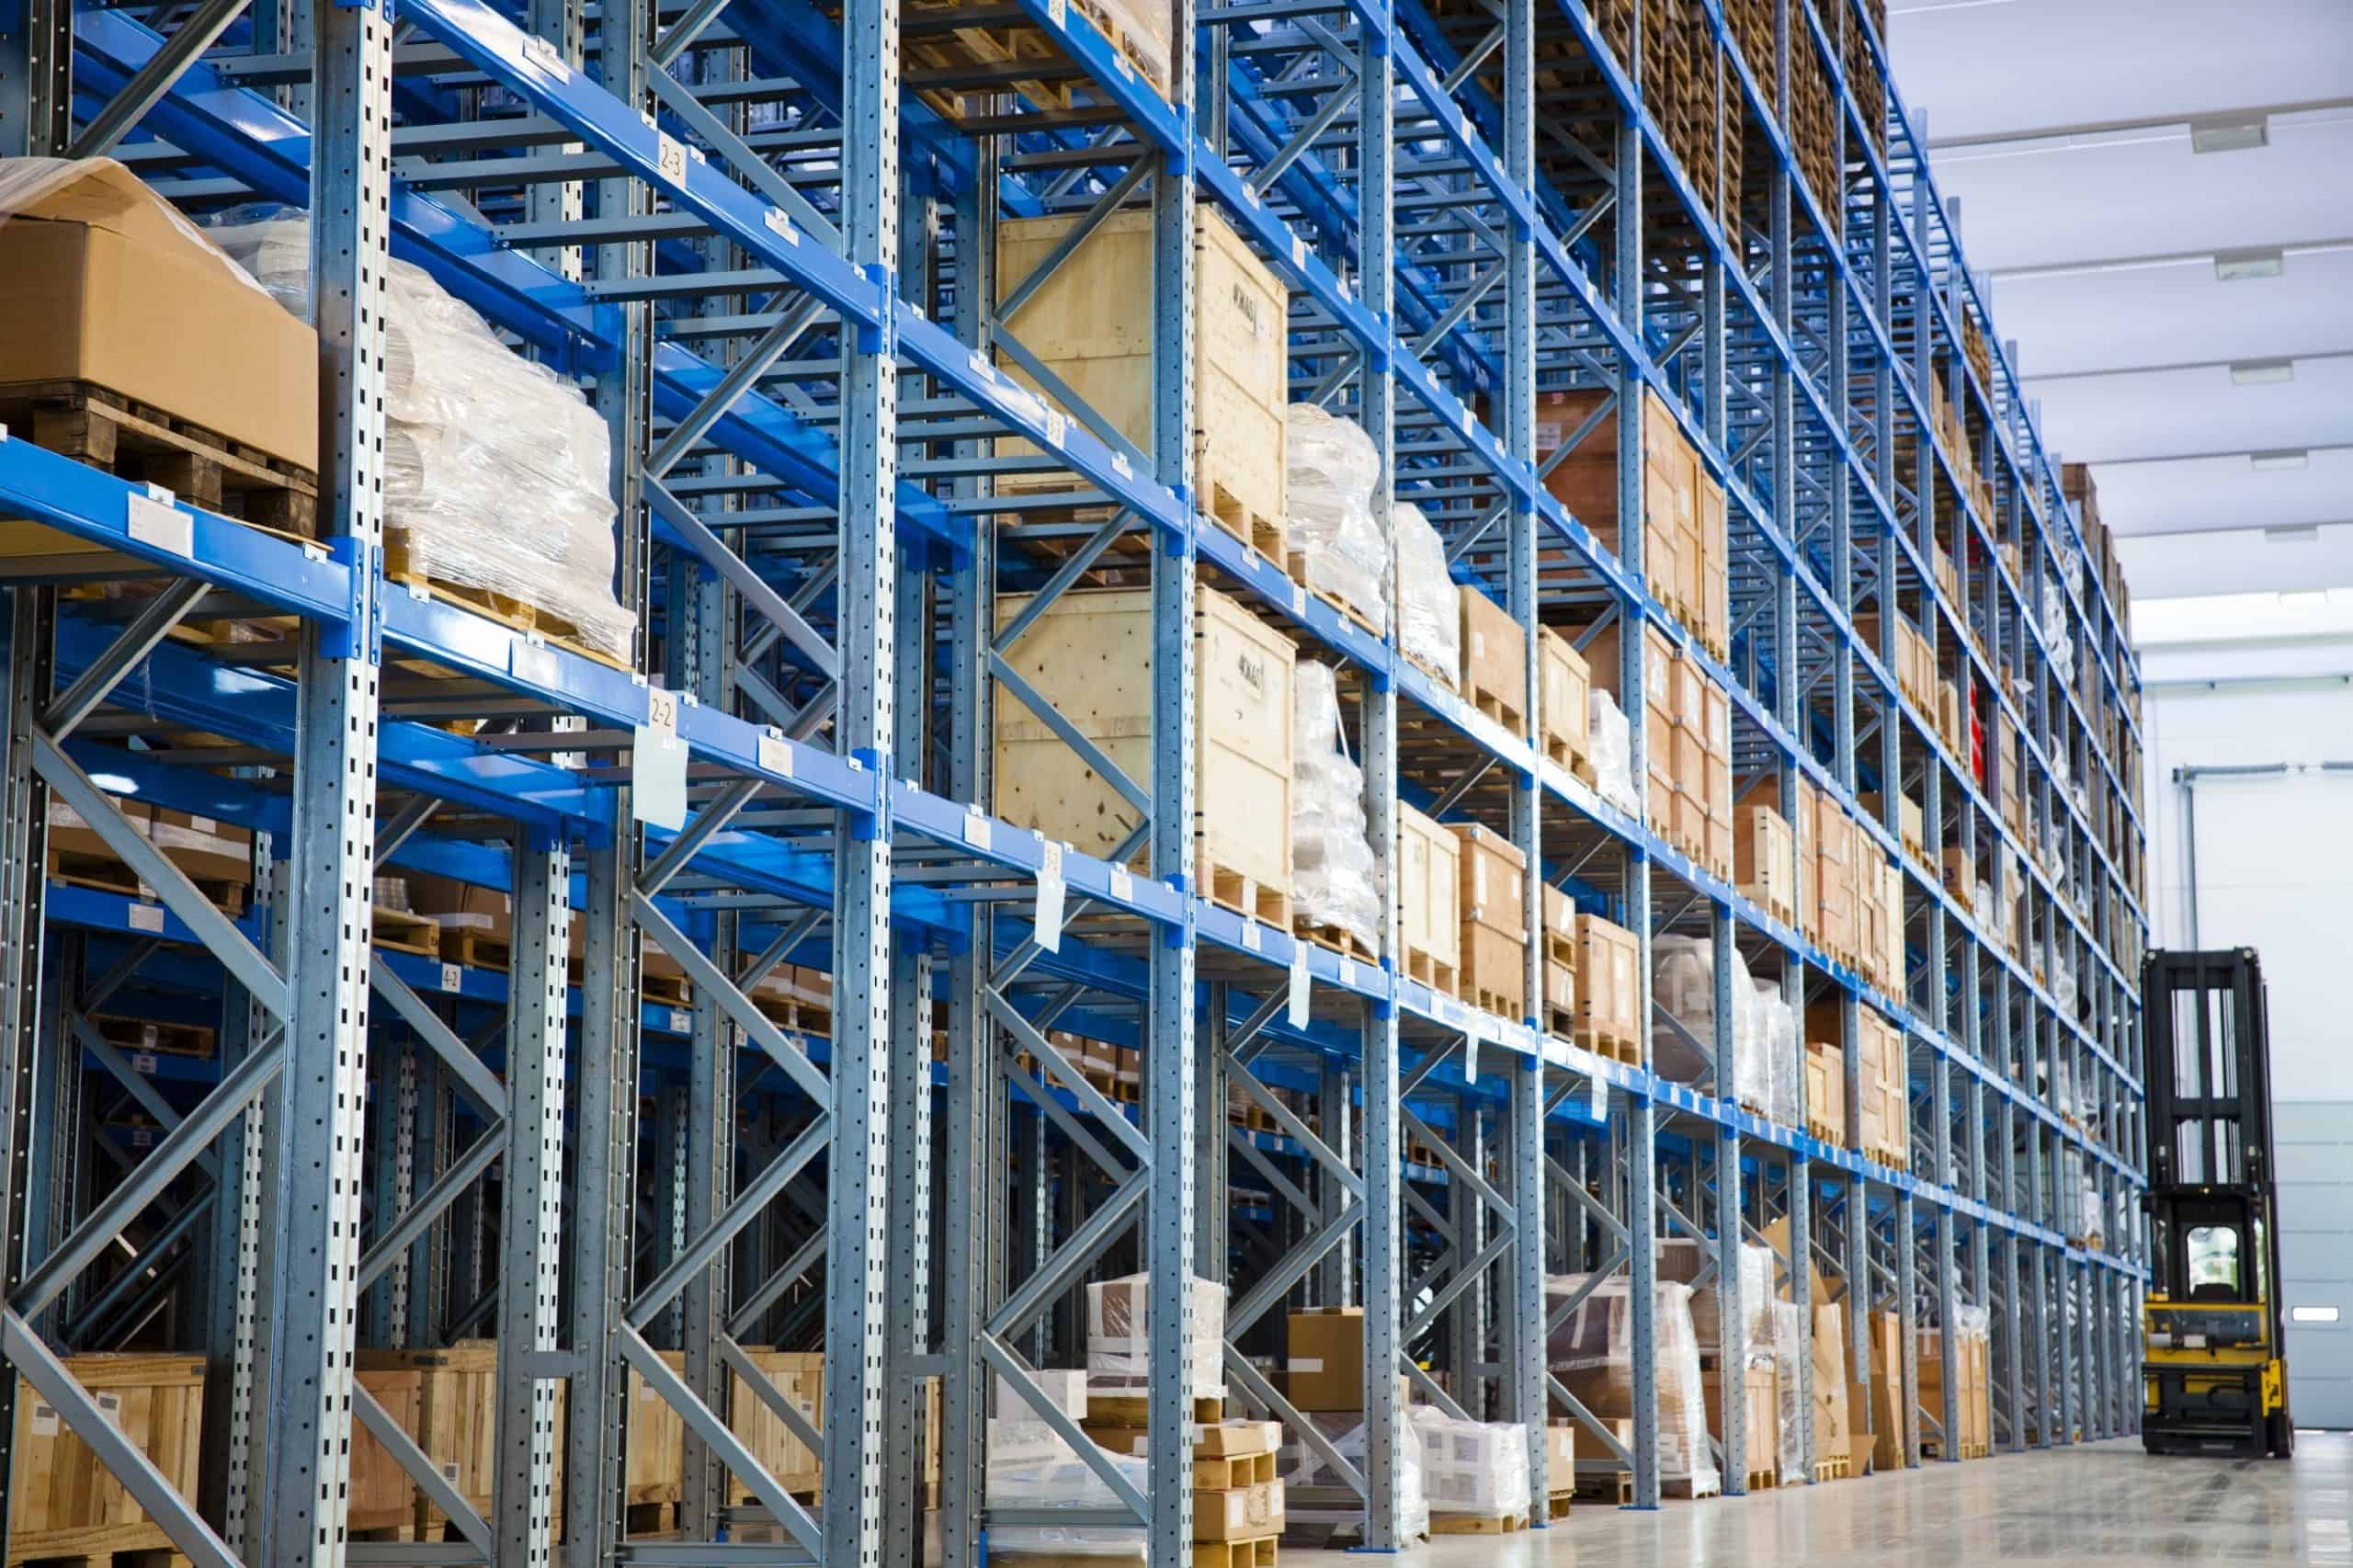 5 Tips to Successfully Maintain Your Warehouse